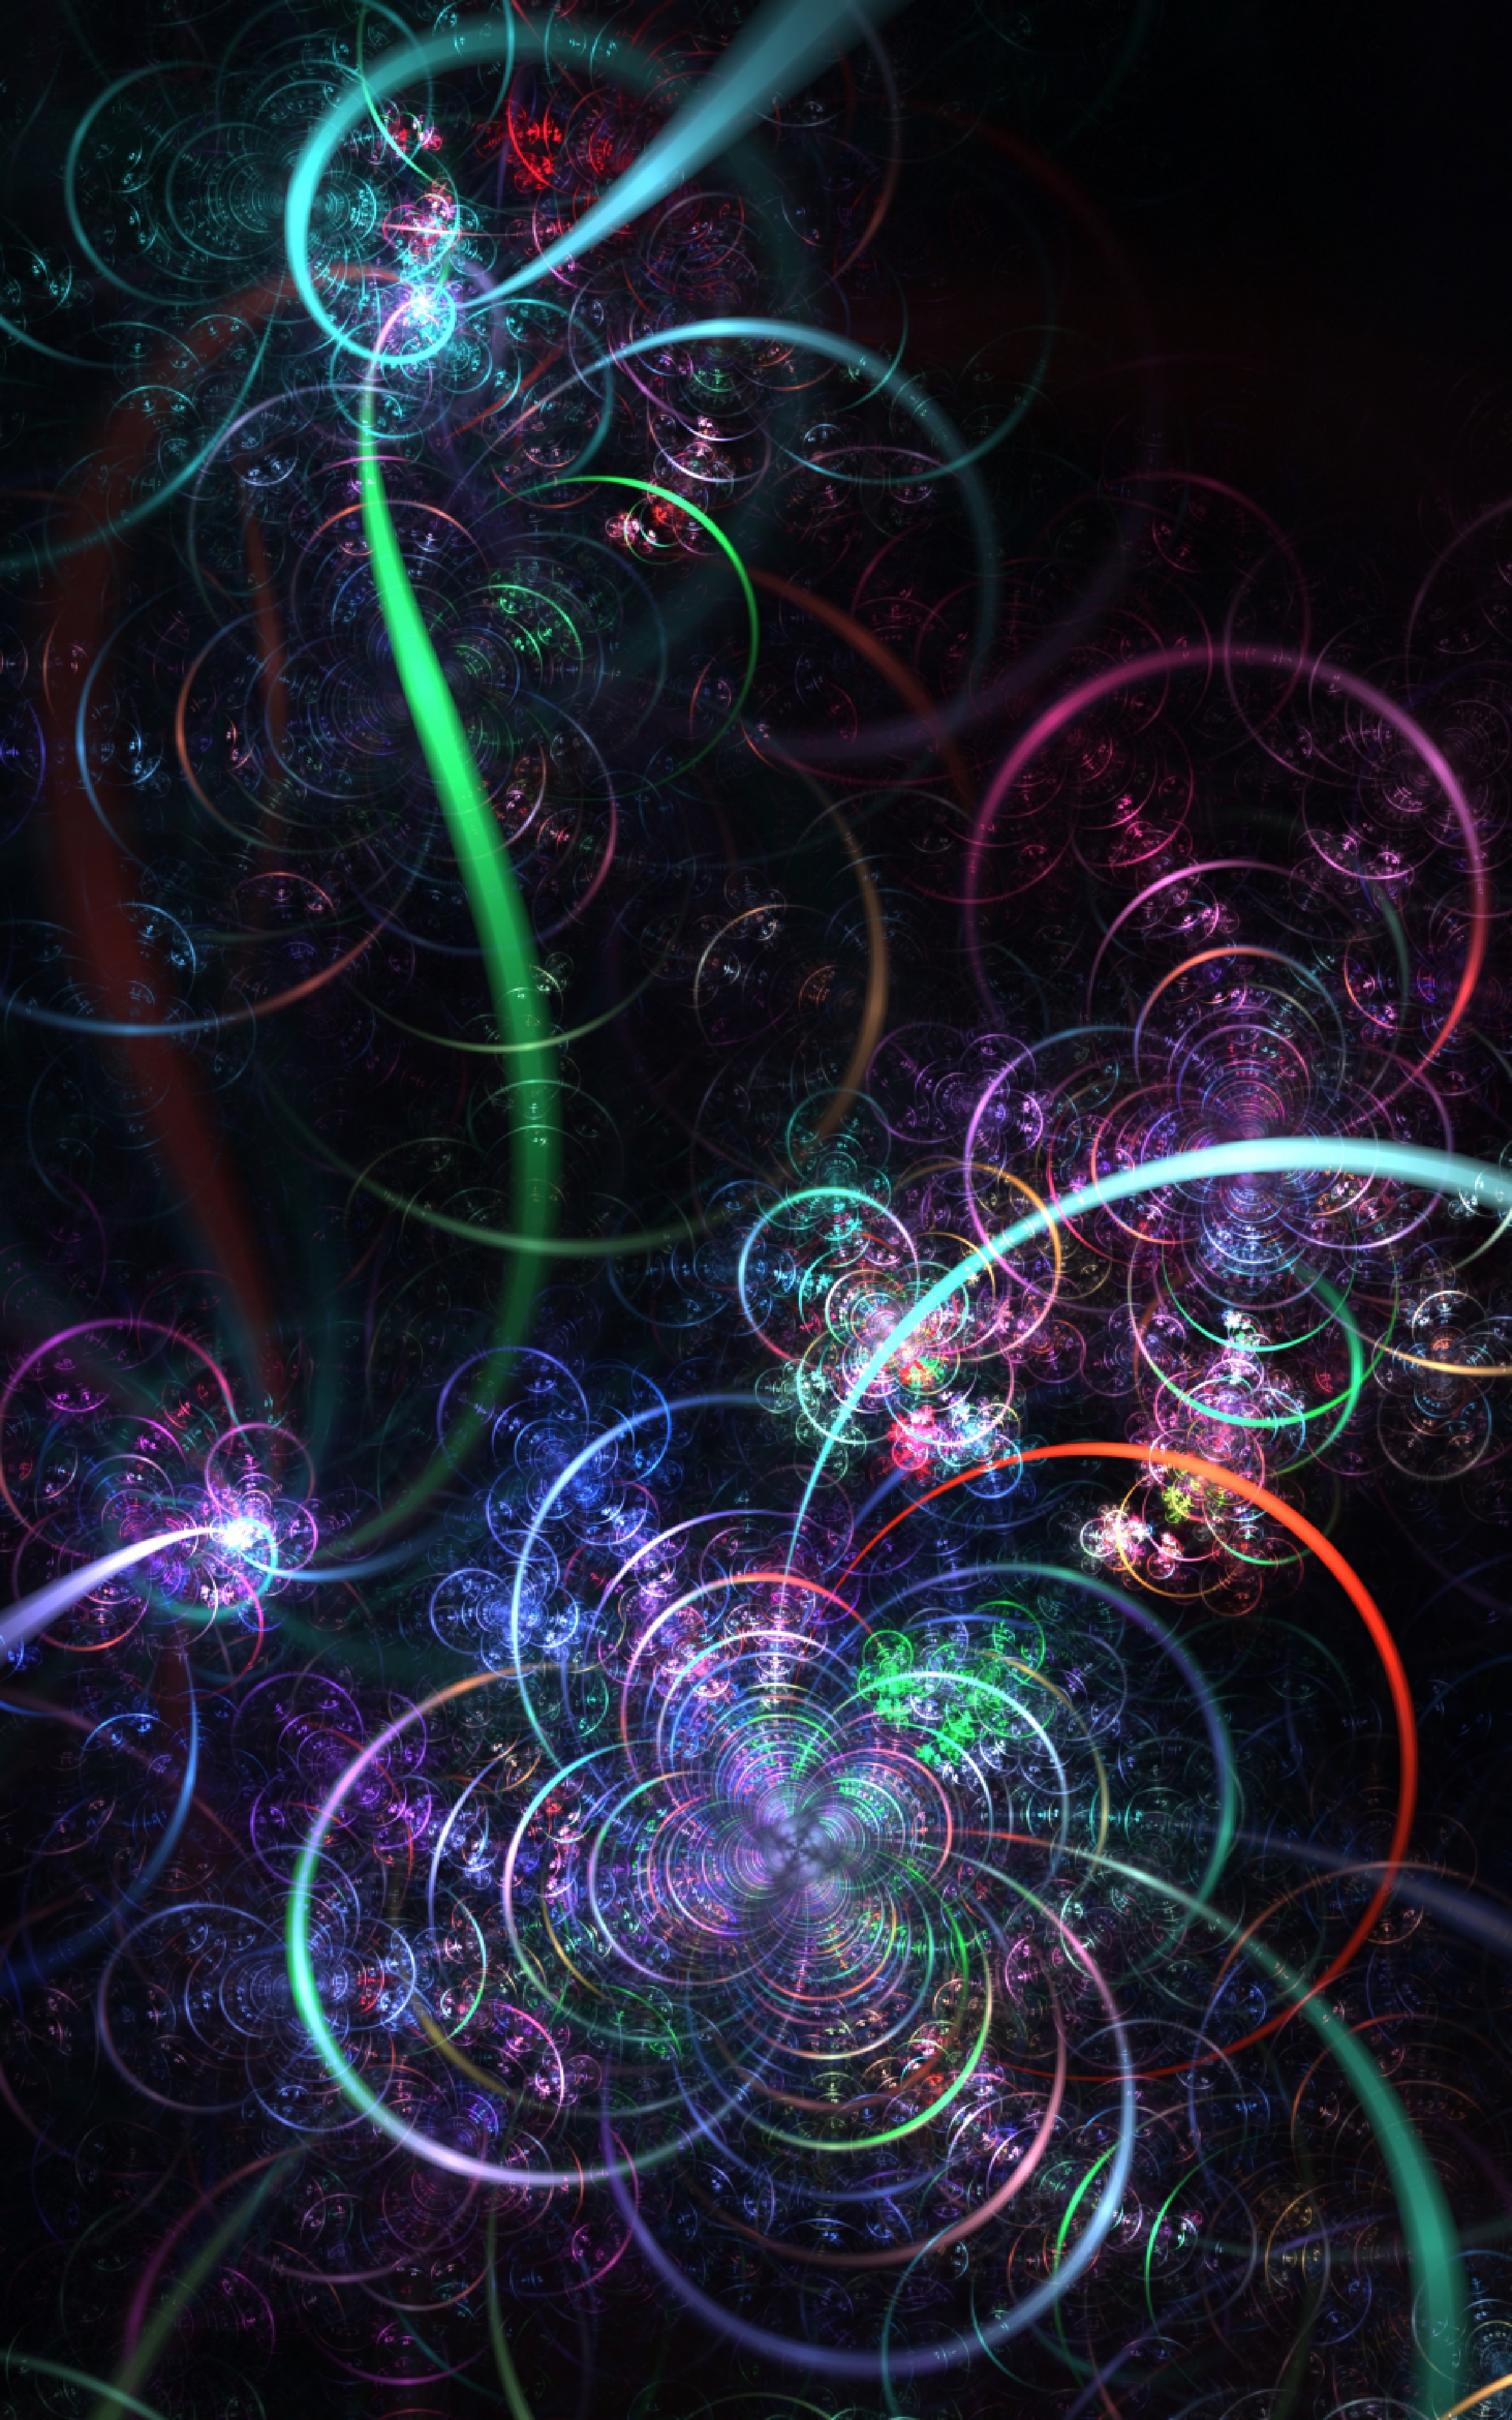 motley, multicolored, lines, abstract, fractal, glow, threads, thread, swirling, involute